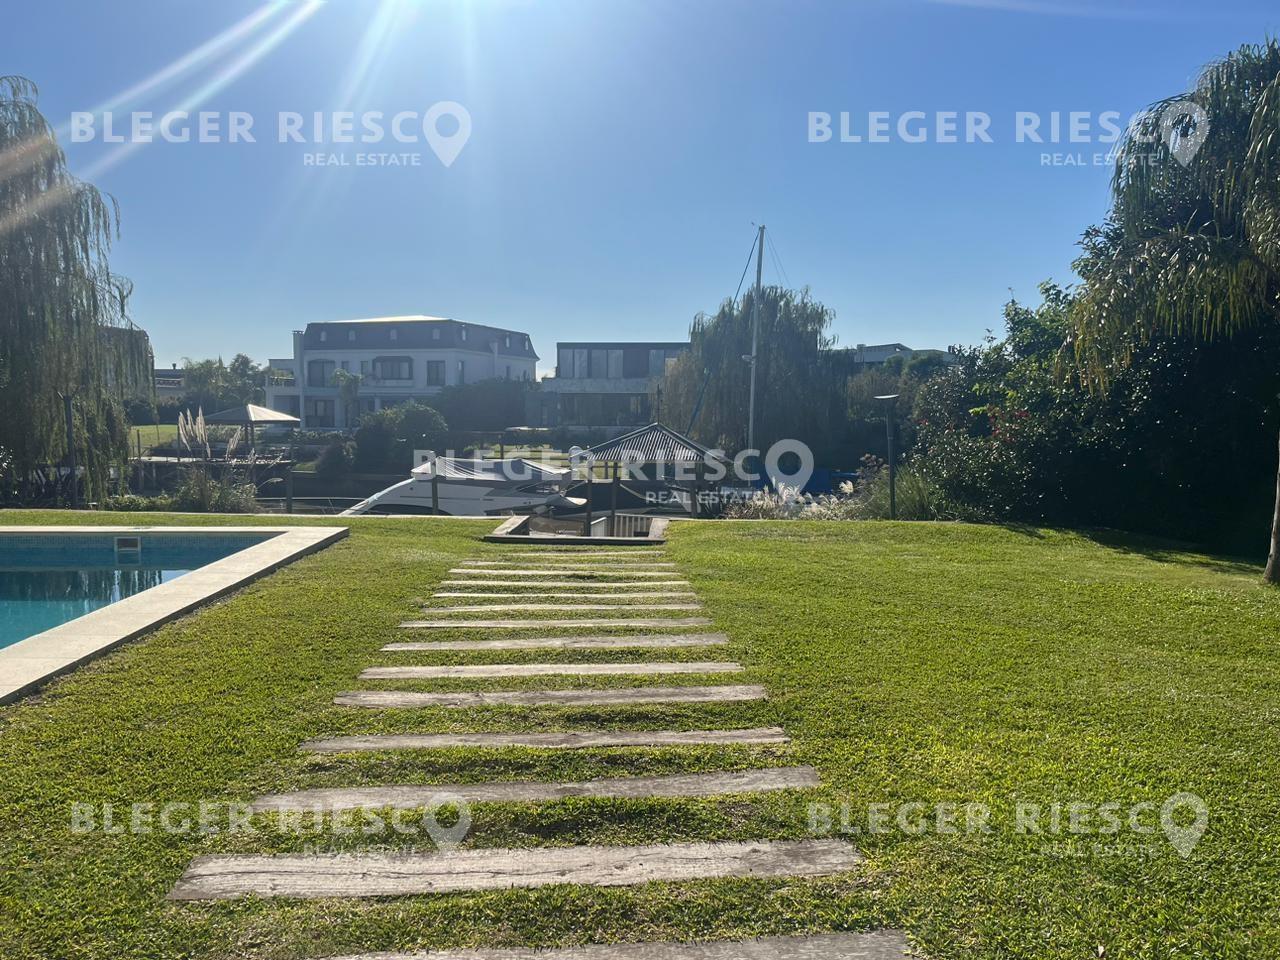 #5100552 | Alquiler | Casa | El Yacht (Bleger-Riesco Real State)